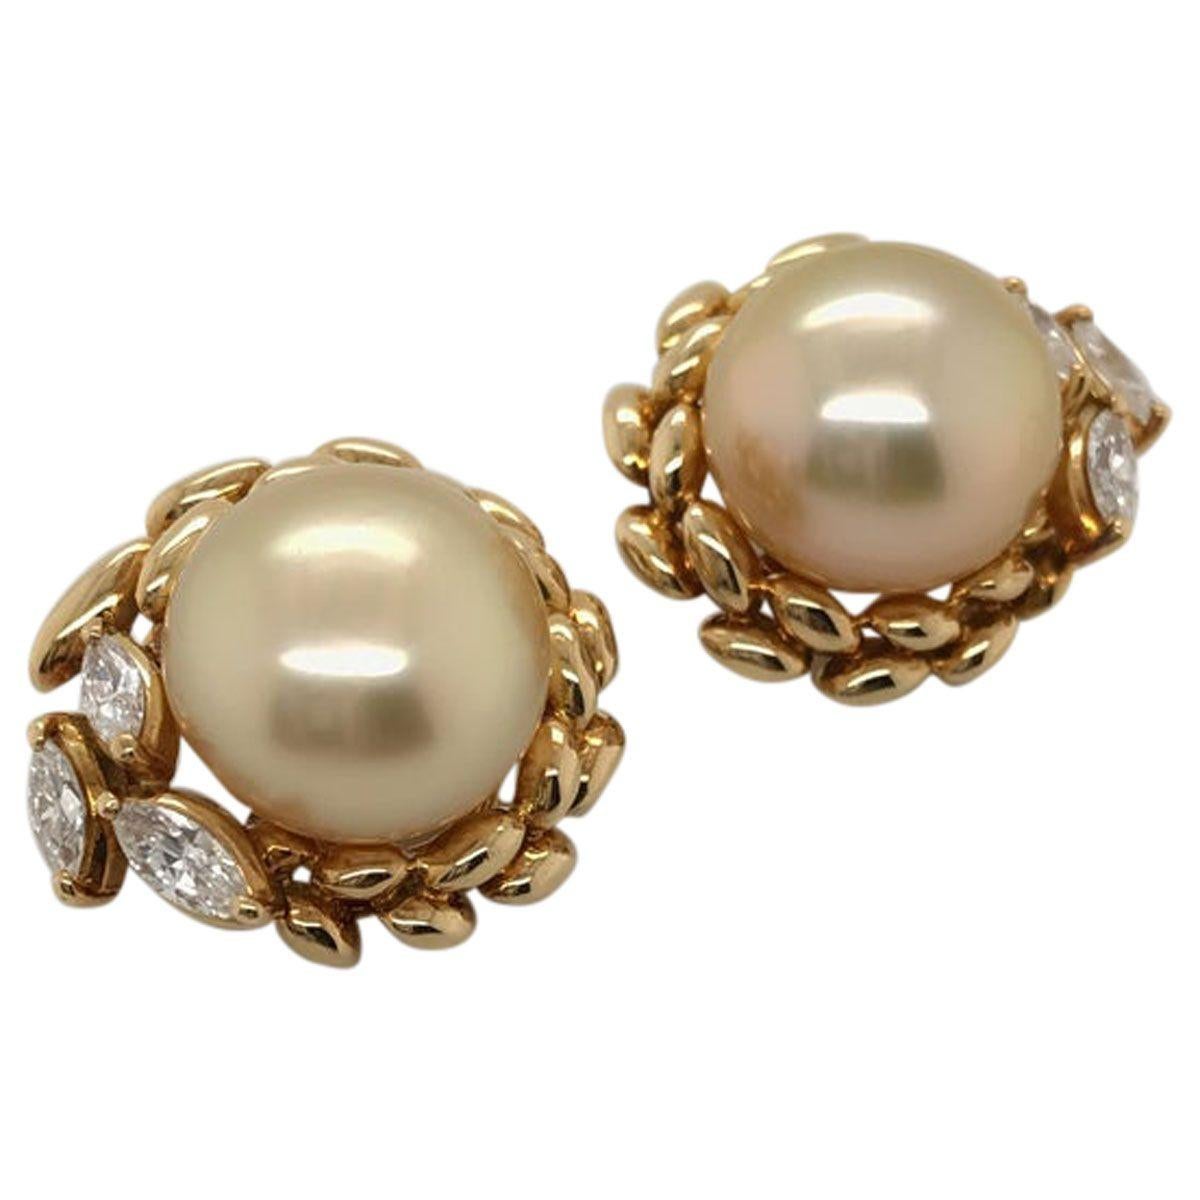 Round Cut Gold South Sea Cultured Pearl and Diamond 18 Karat Yellow Gold Ear Clips